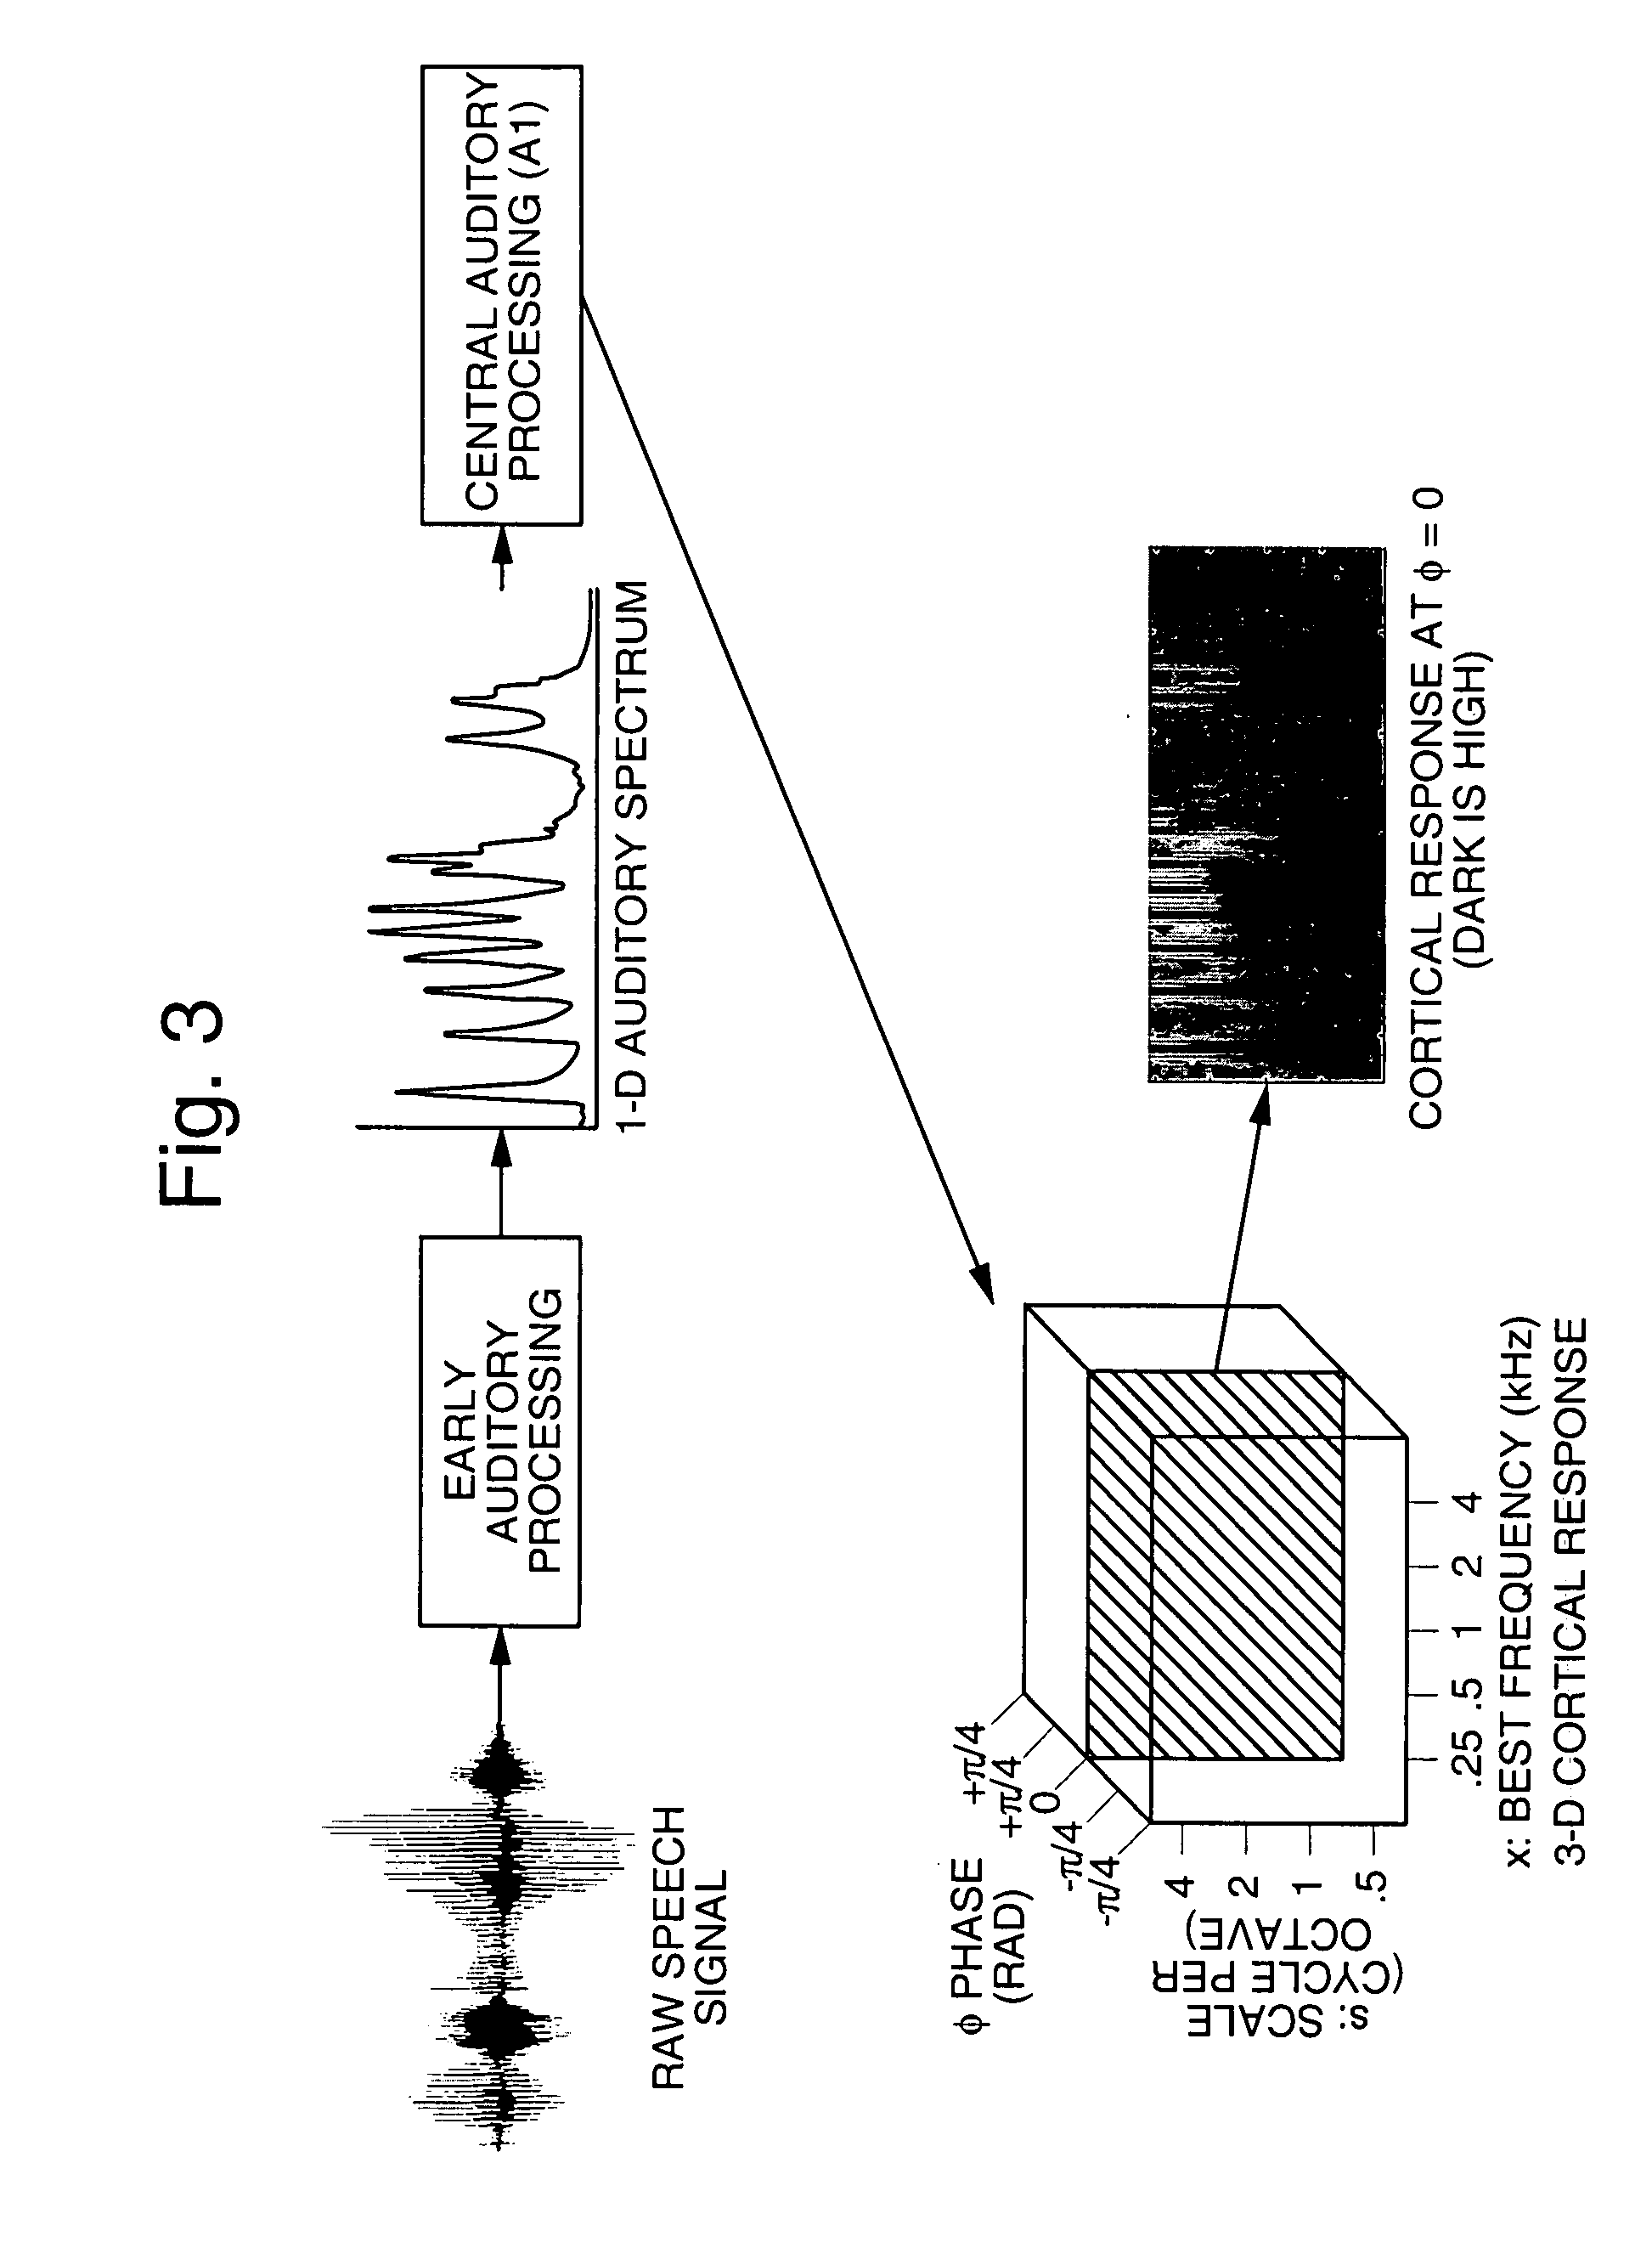 Automatic pattern recognition using category dependent feature selection